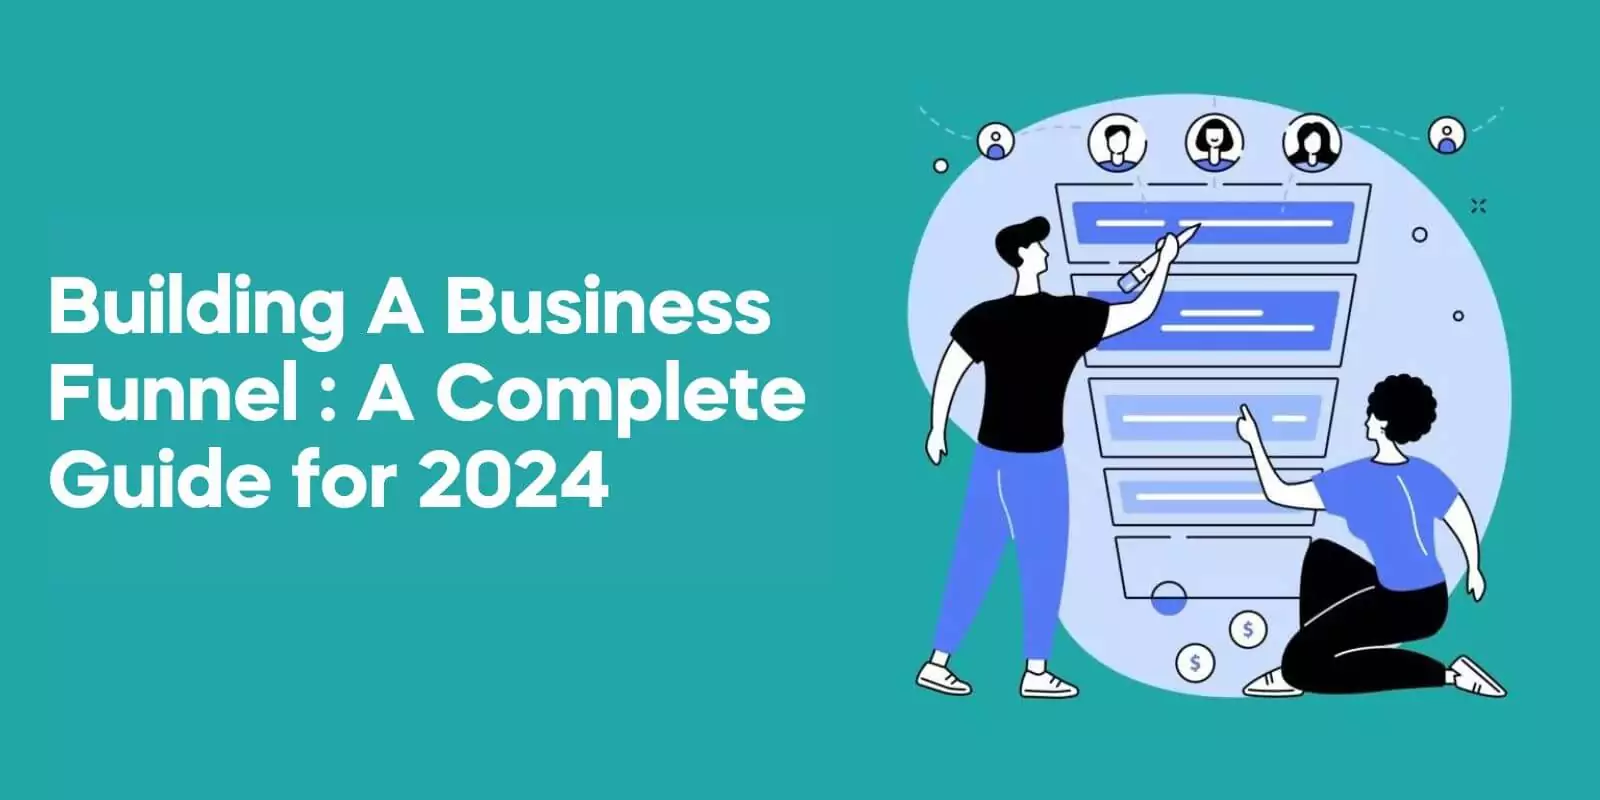 Building a Business Funnel A Complete Guide for 2024